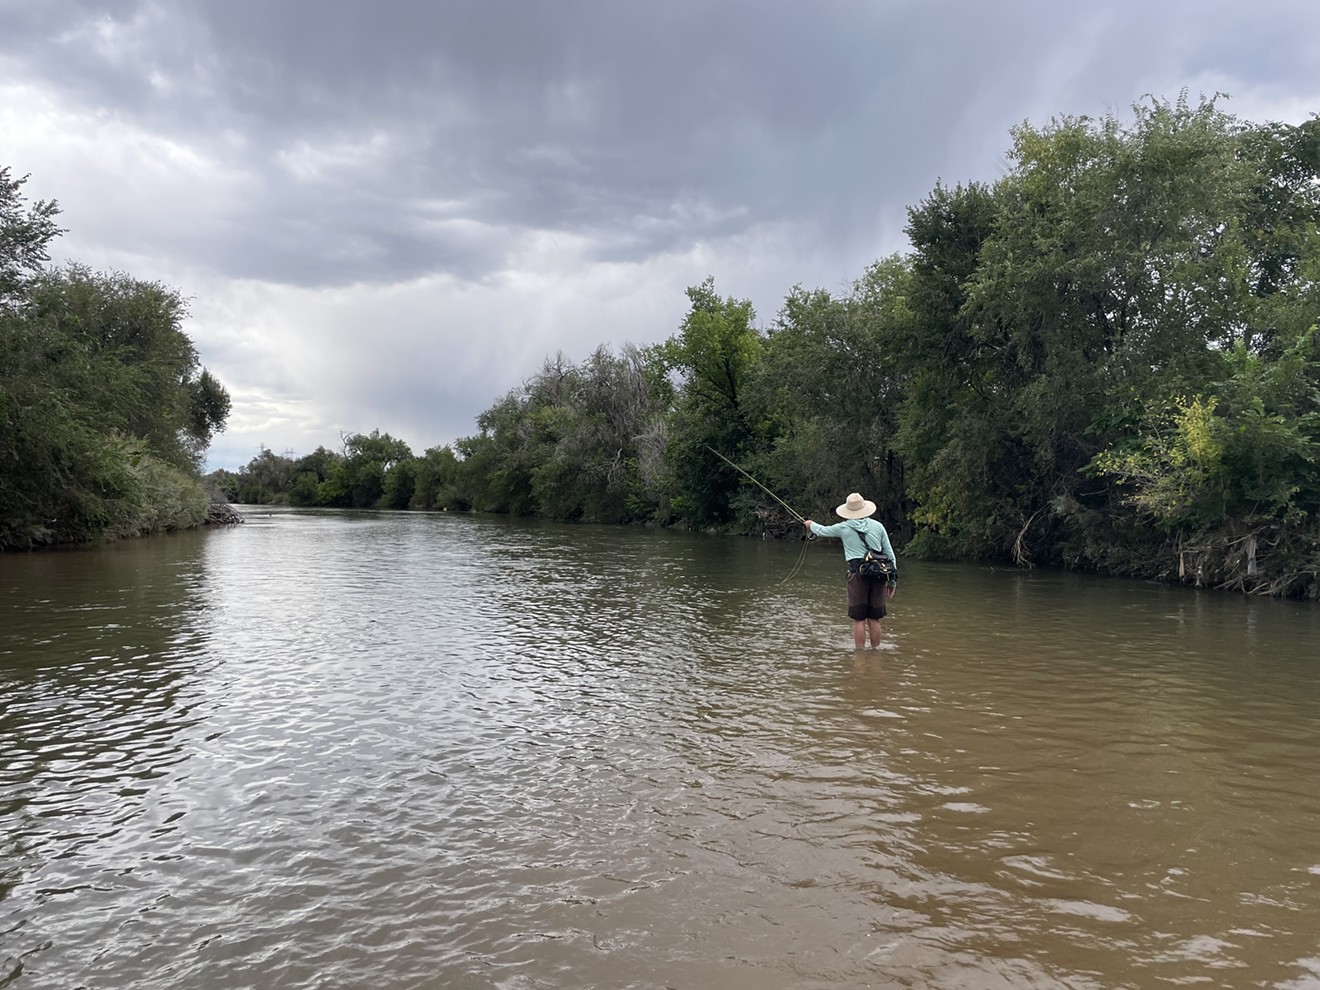 This section of the South Platte will get added protections.